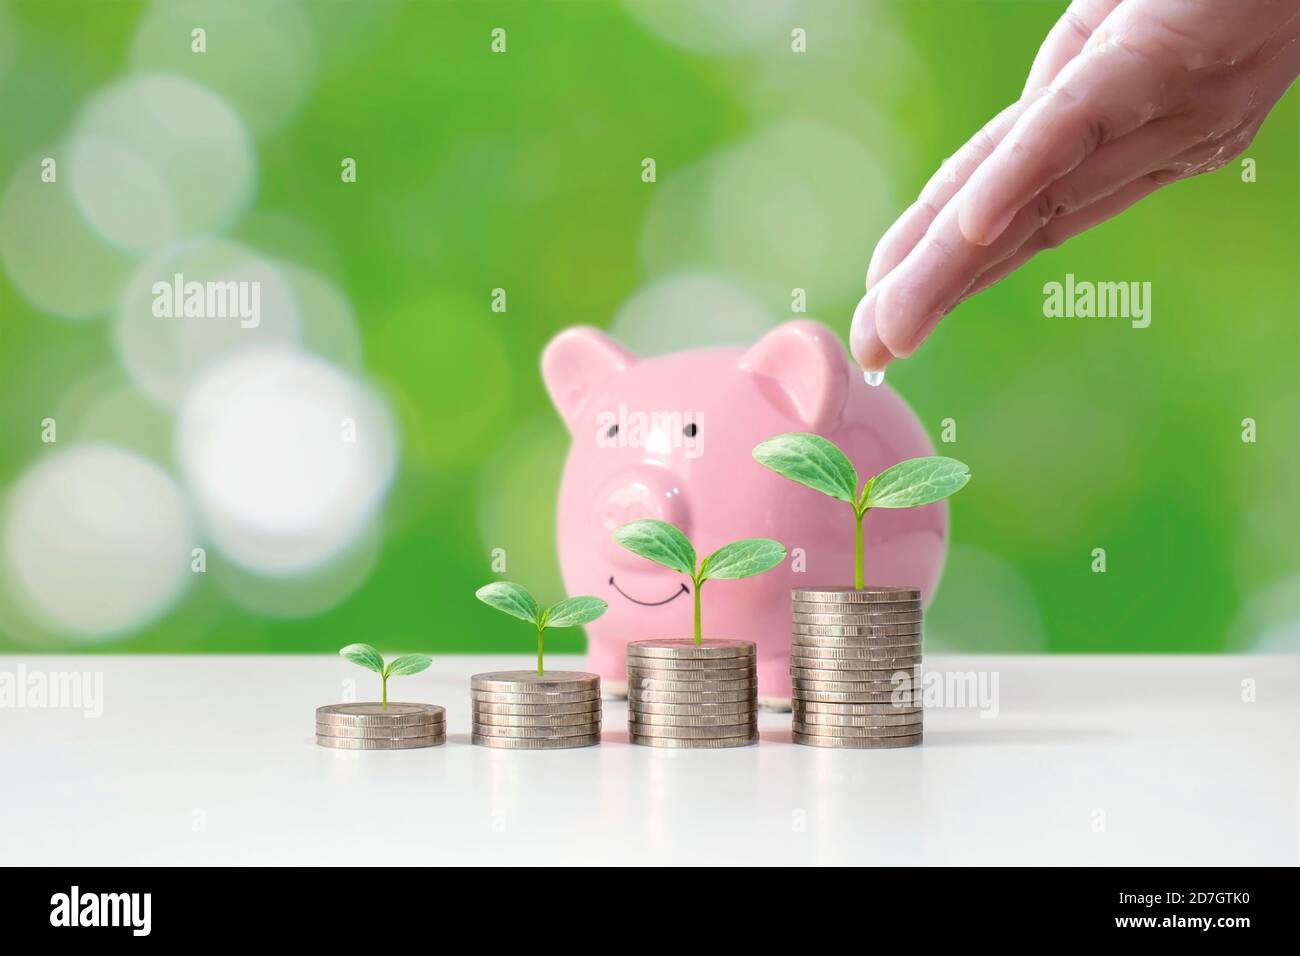 Coin graph shows financial growth and tree planting on coin piles, as well as piggy banks, money saving ideas and financial growth. Stock Photo